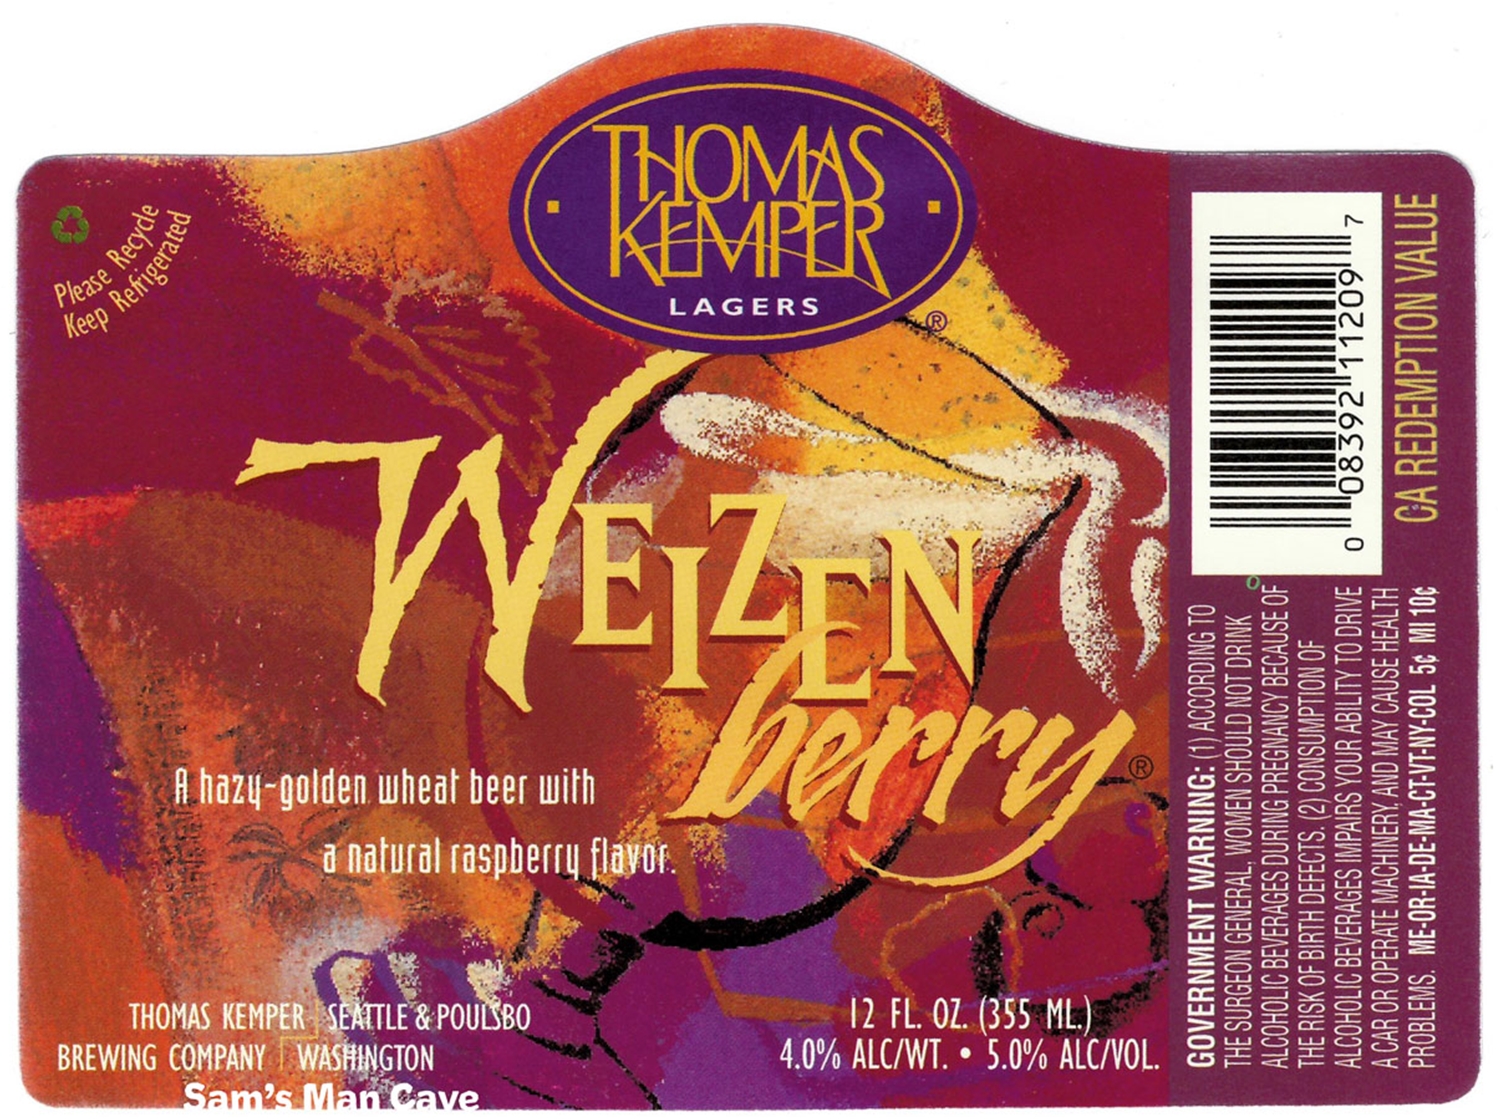 Thomas Kemper Weizenberry Beer Label